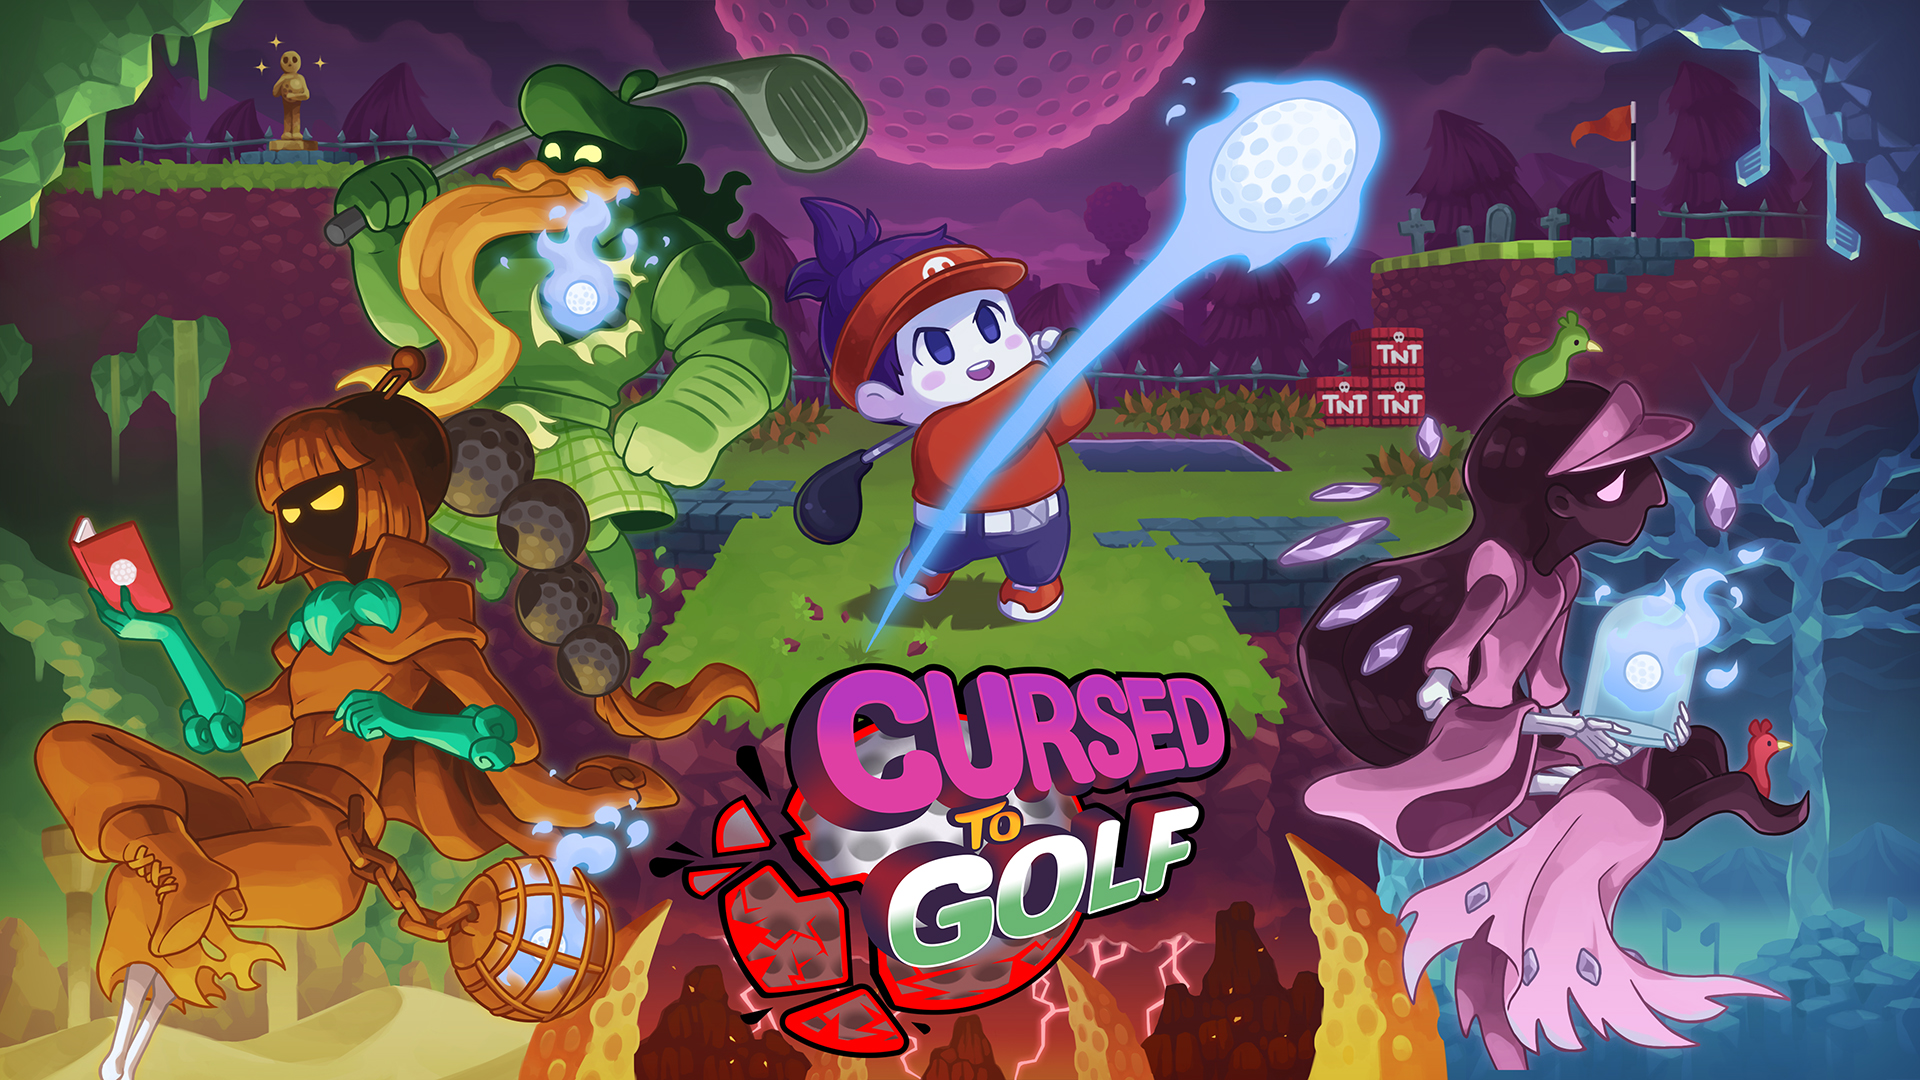 Cursed to Golf is out today on PS5 and PS4